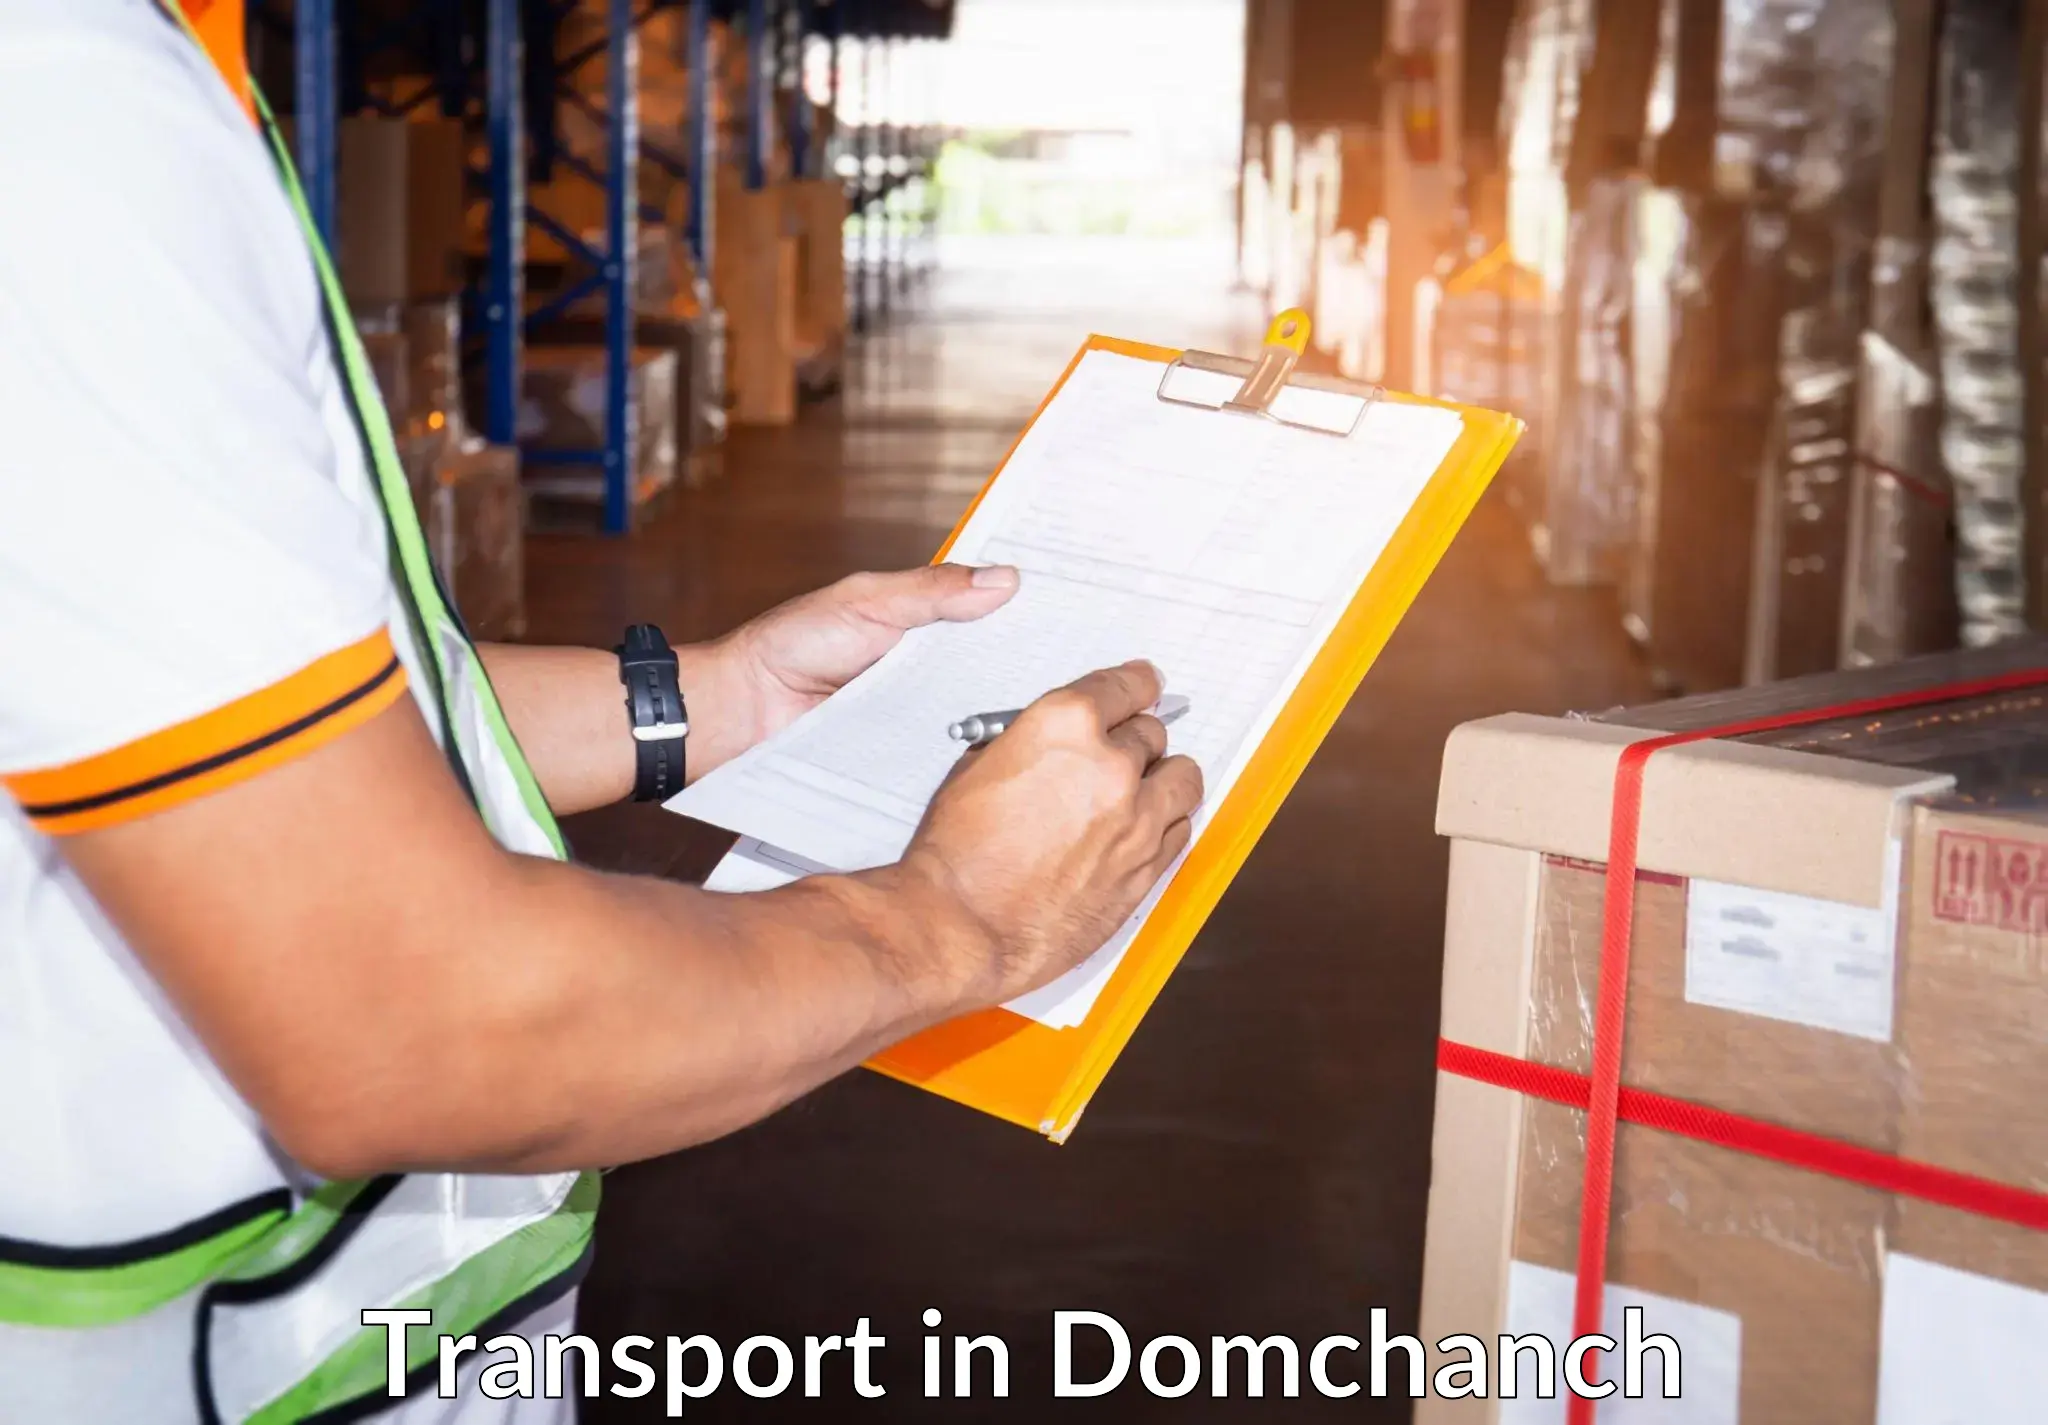 Transport shared services in Domchanch